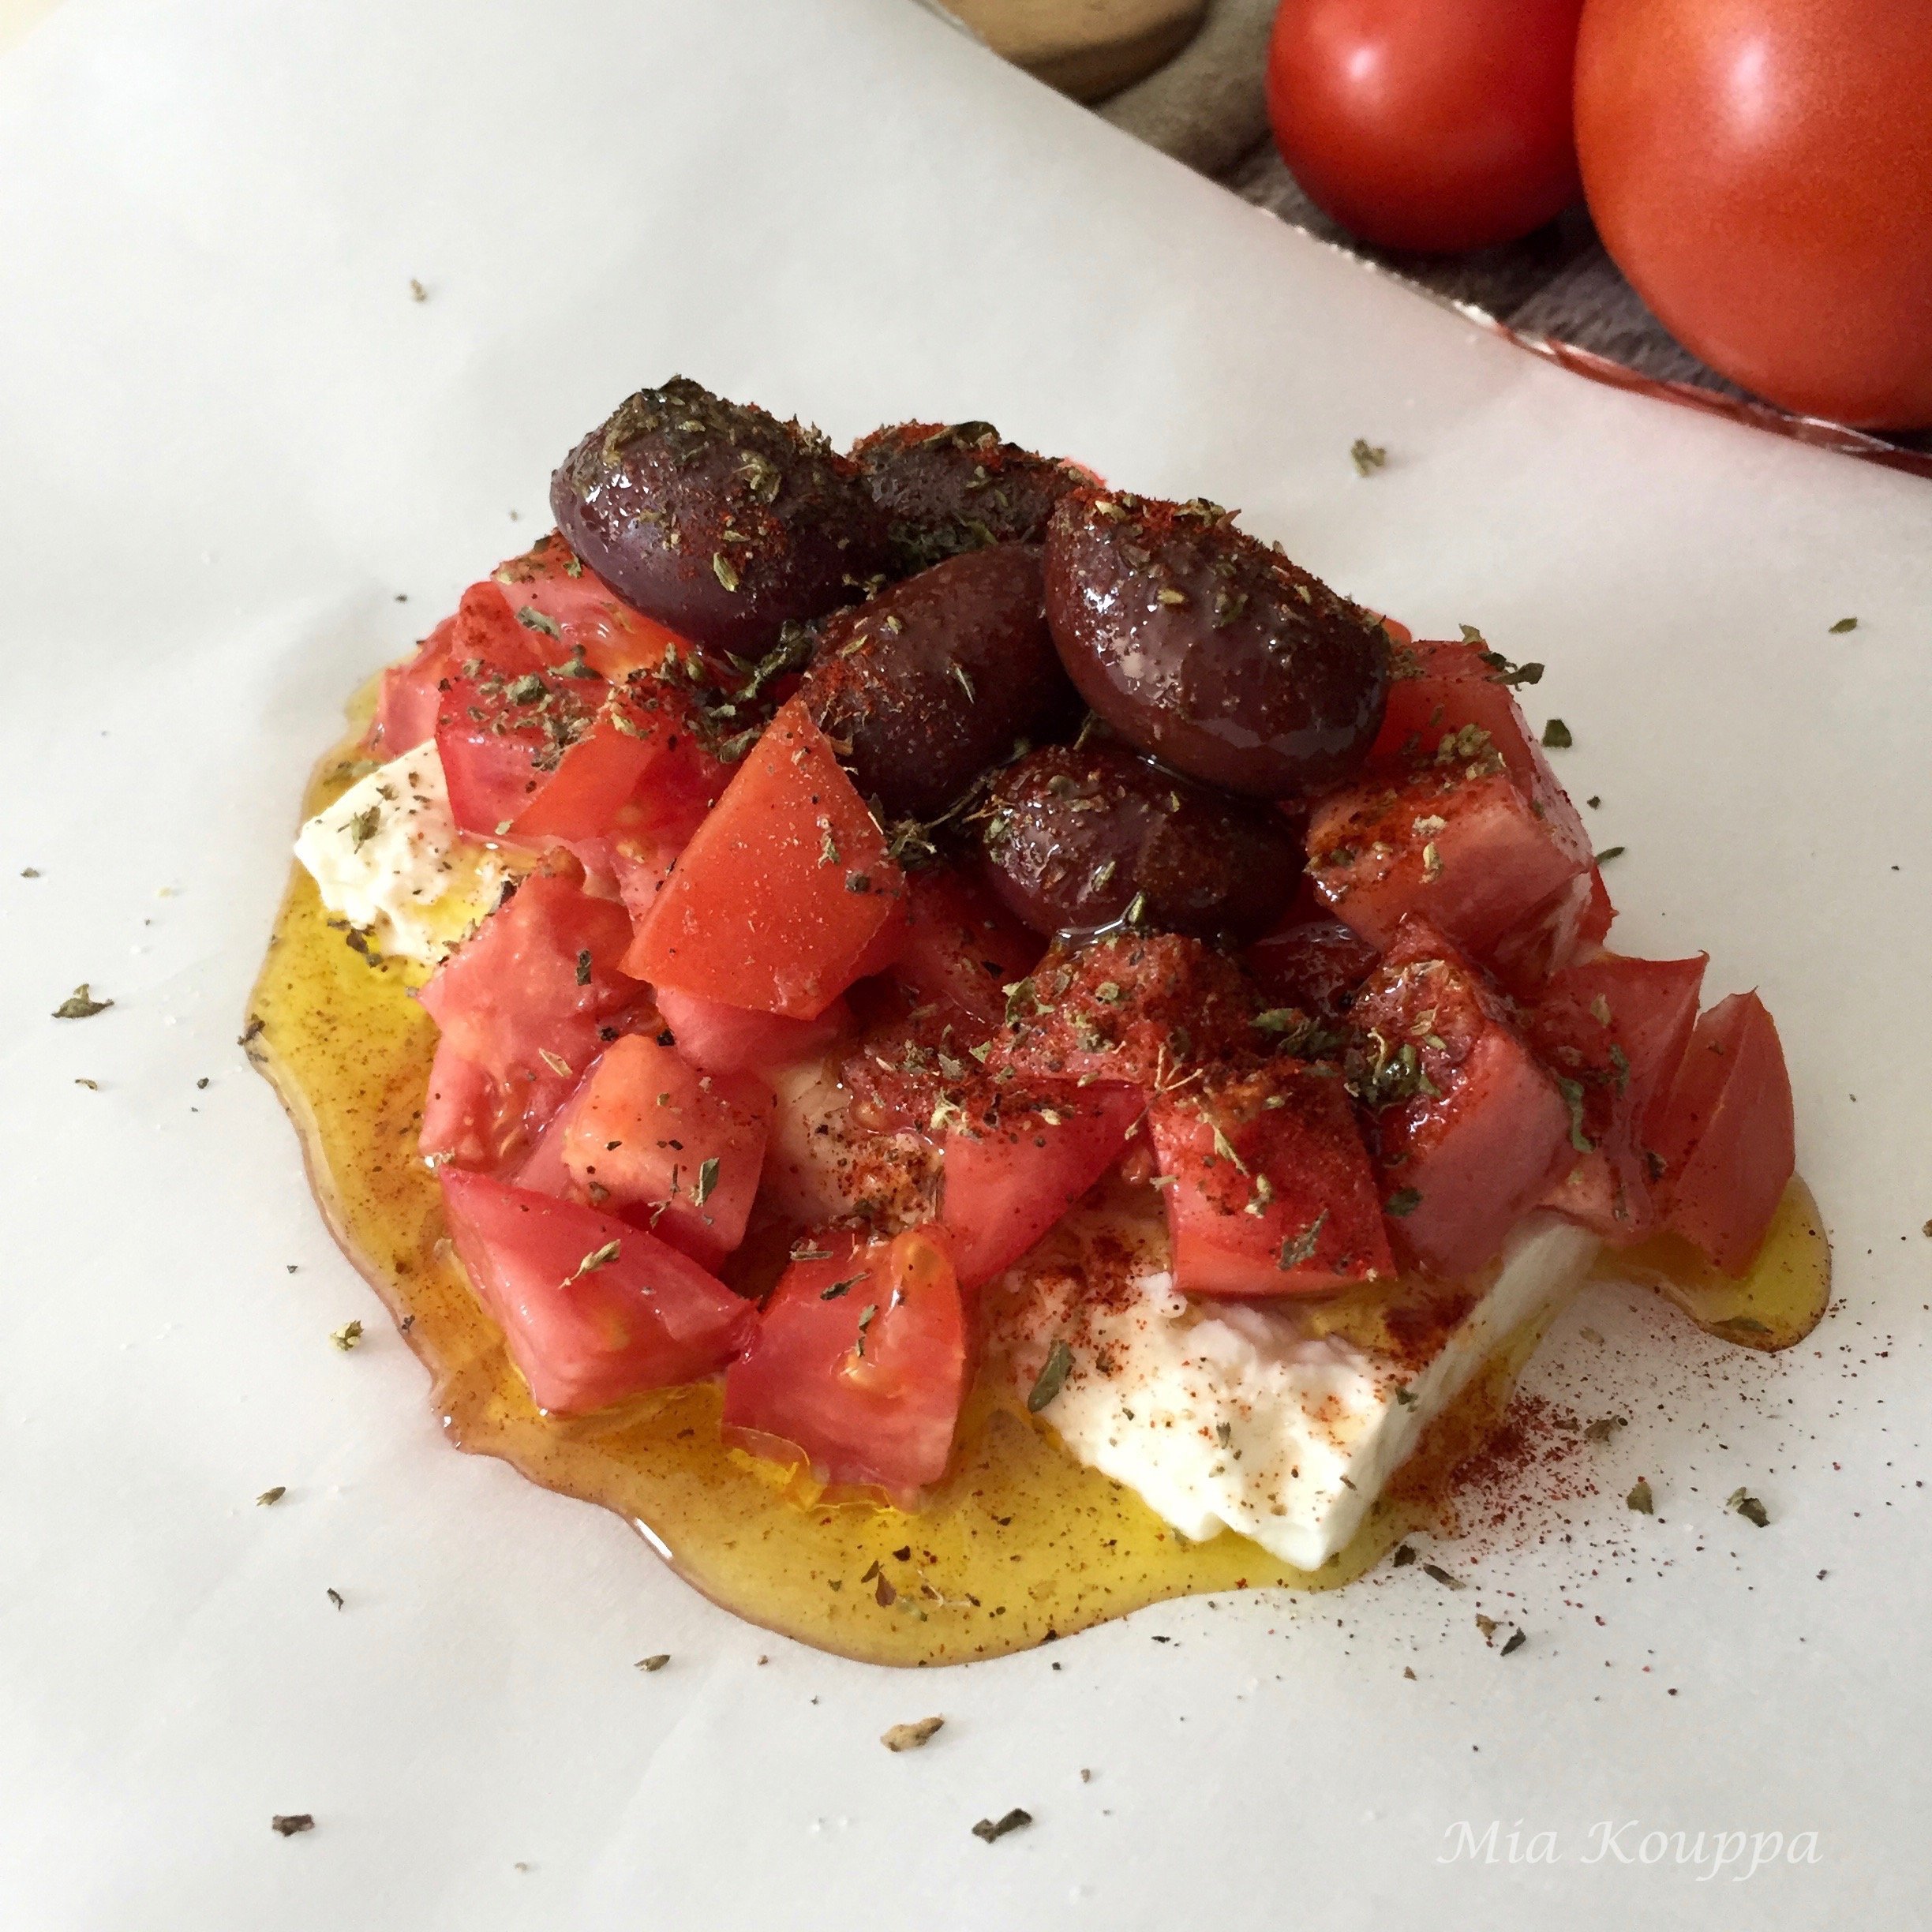 Warm feta packages, with tomatoes and olives